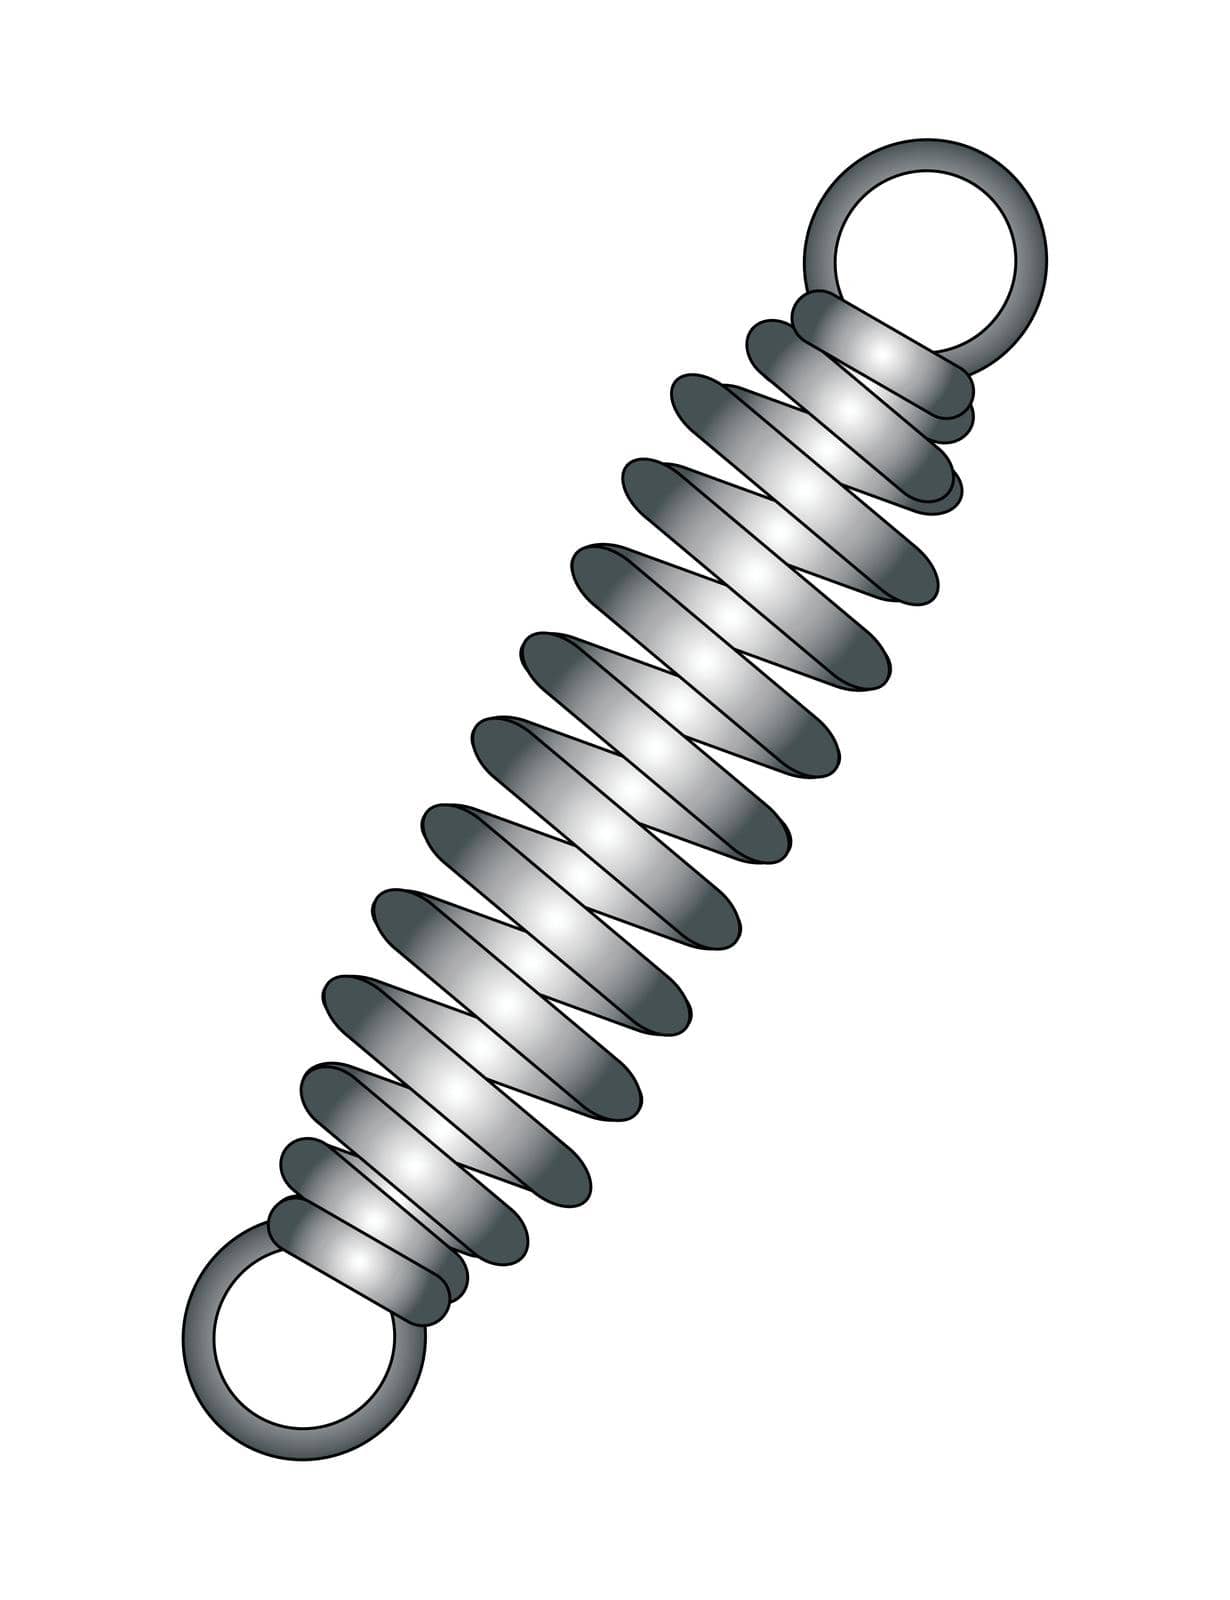 A steel tension spring as found on many pieces of equipment isolated over a white background